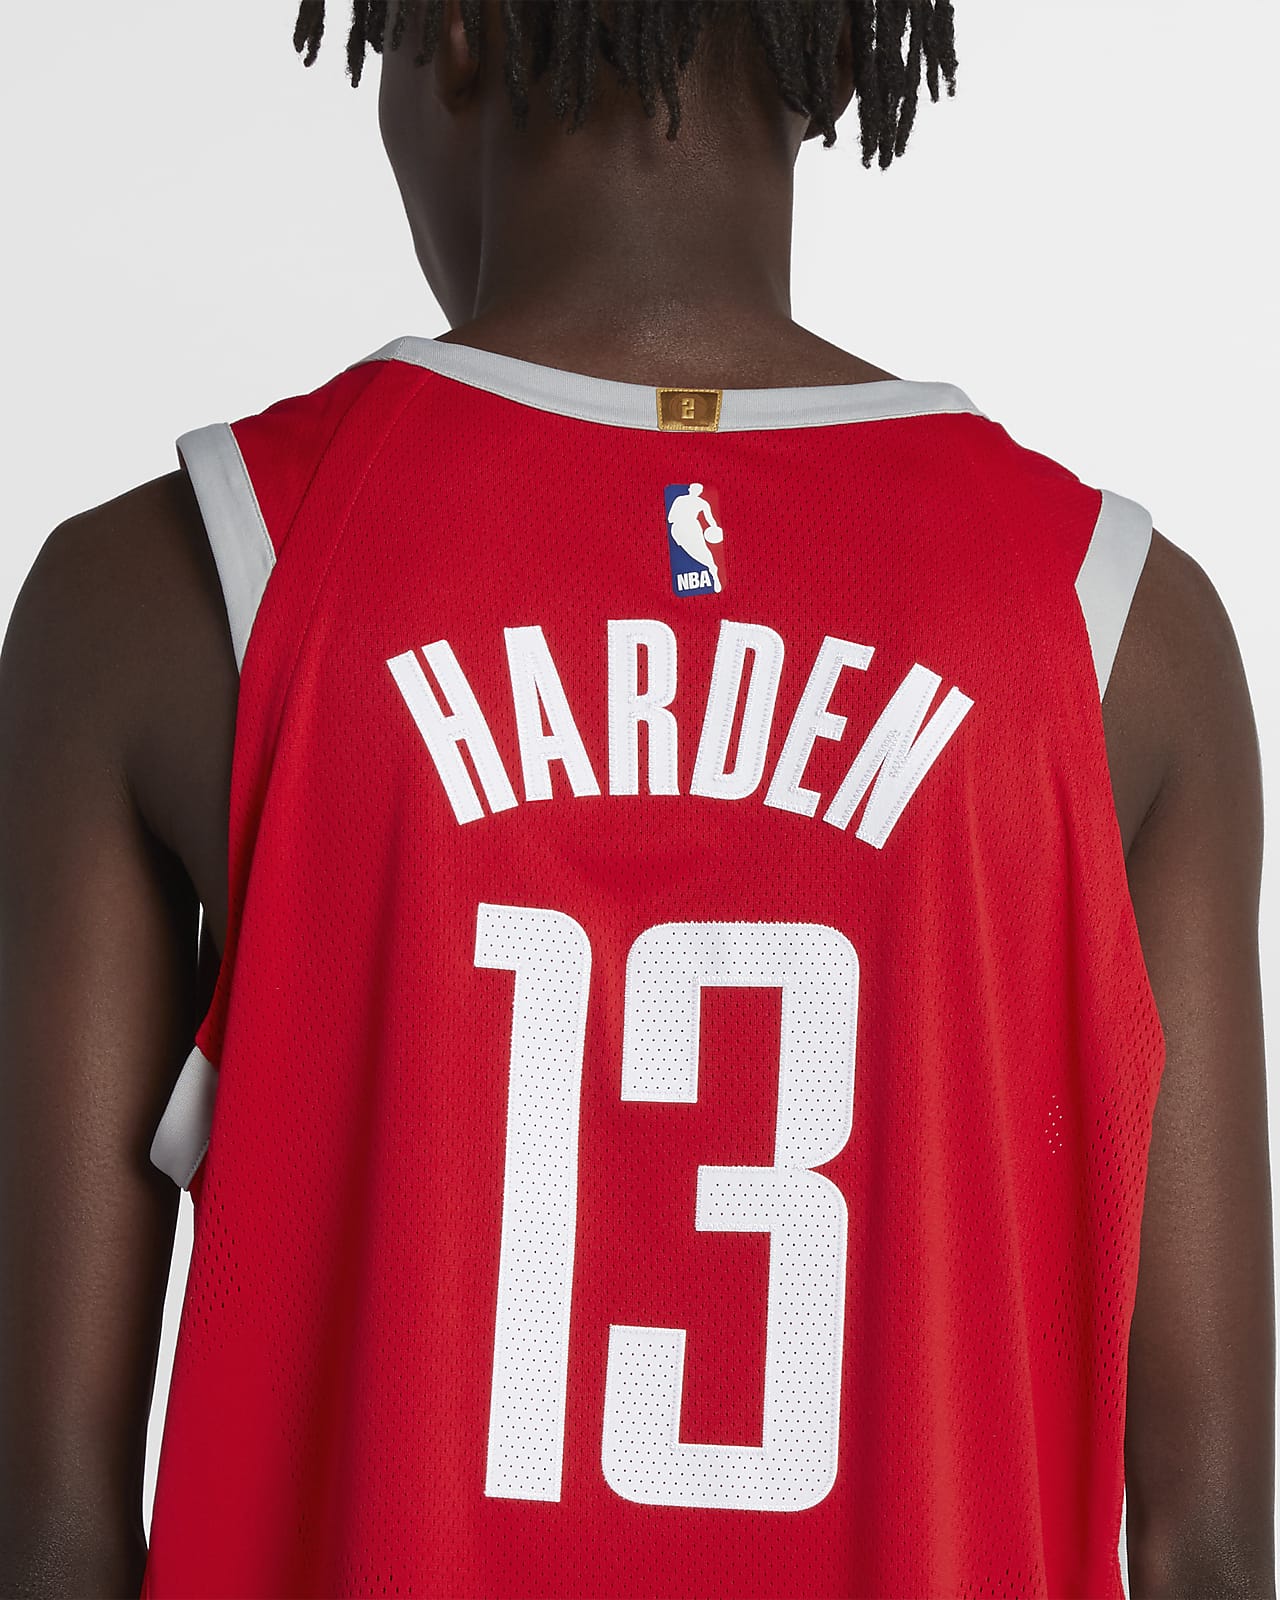 harden authentic jersey